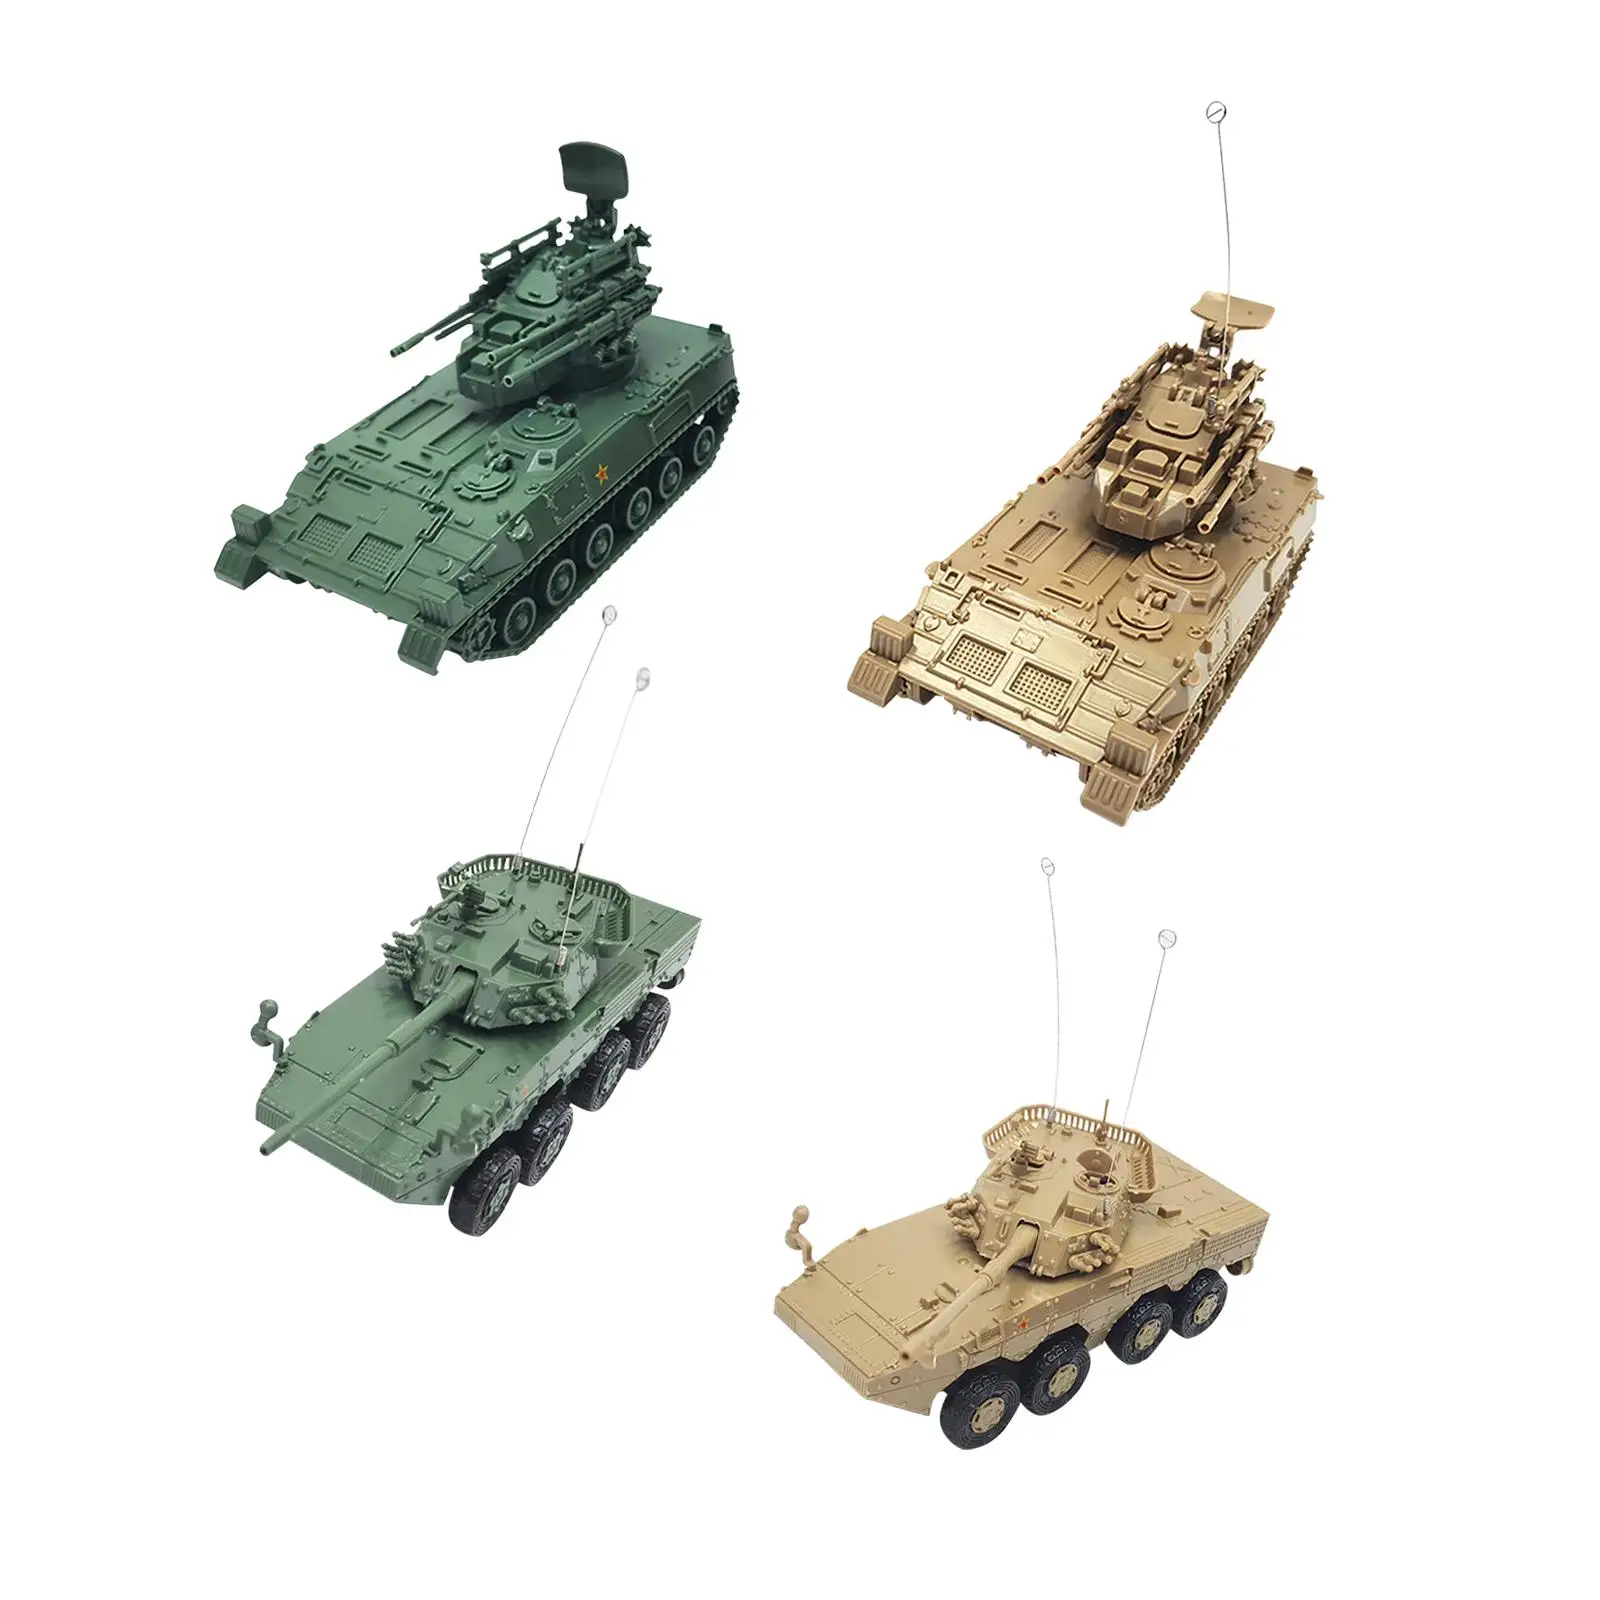 1/72 Scale Armored Tank Model Puzzle Tracked Crawler Chariot Armored Vehicles for Boys Display Table Scene Collection Keepsake